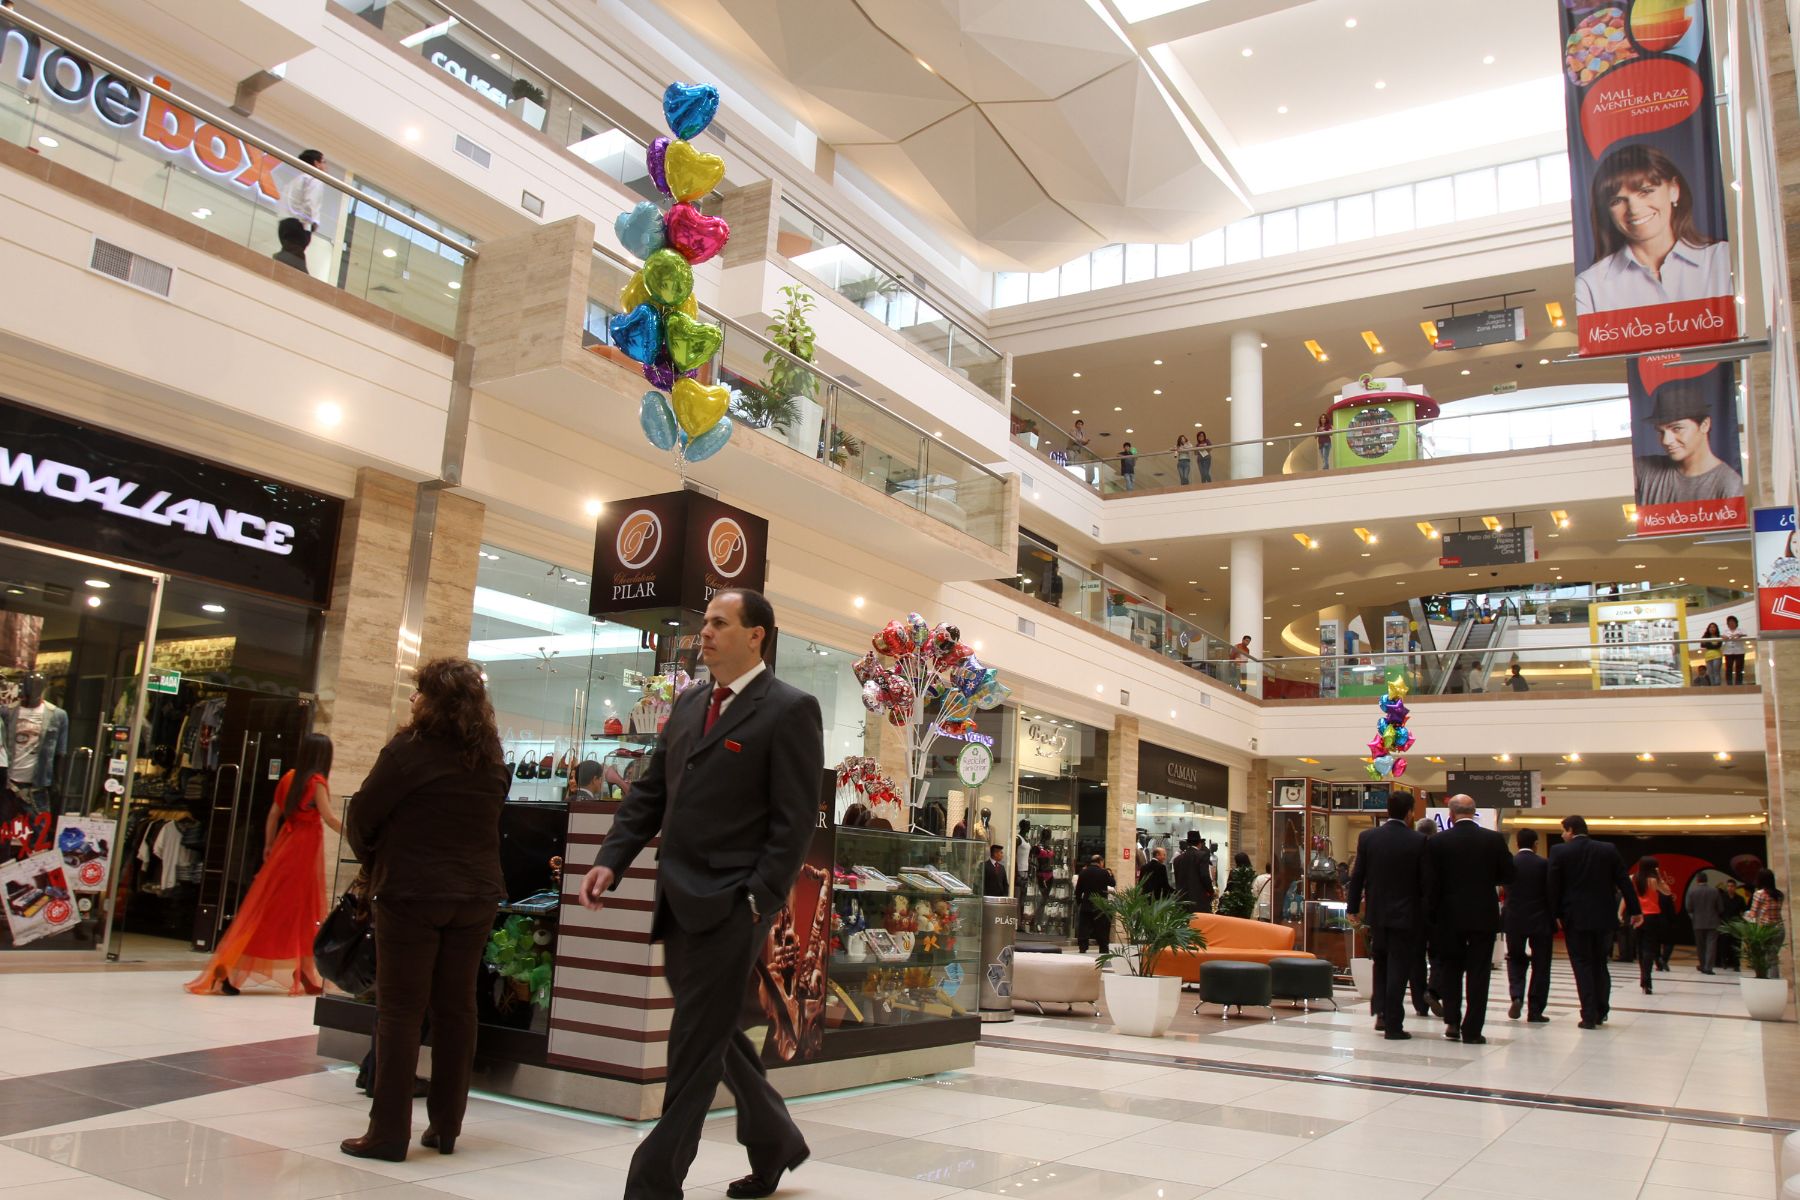 Opening day of a shopping mall in the nation